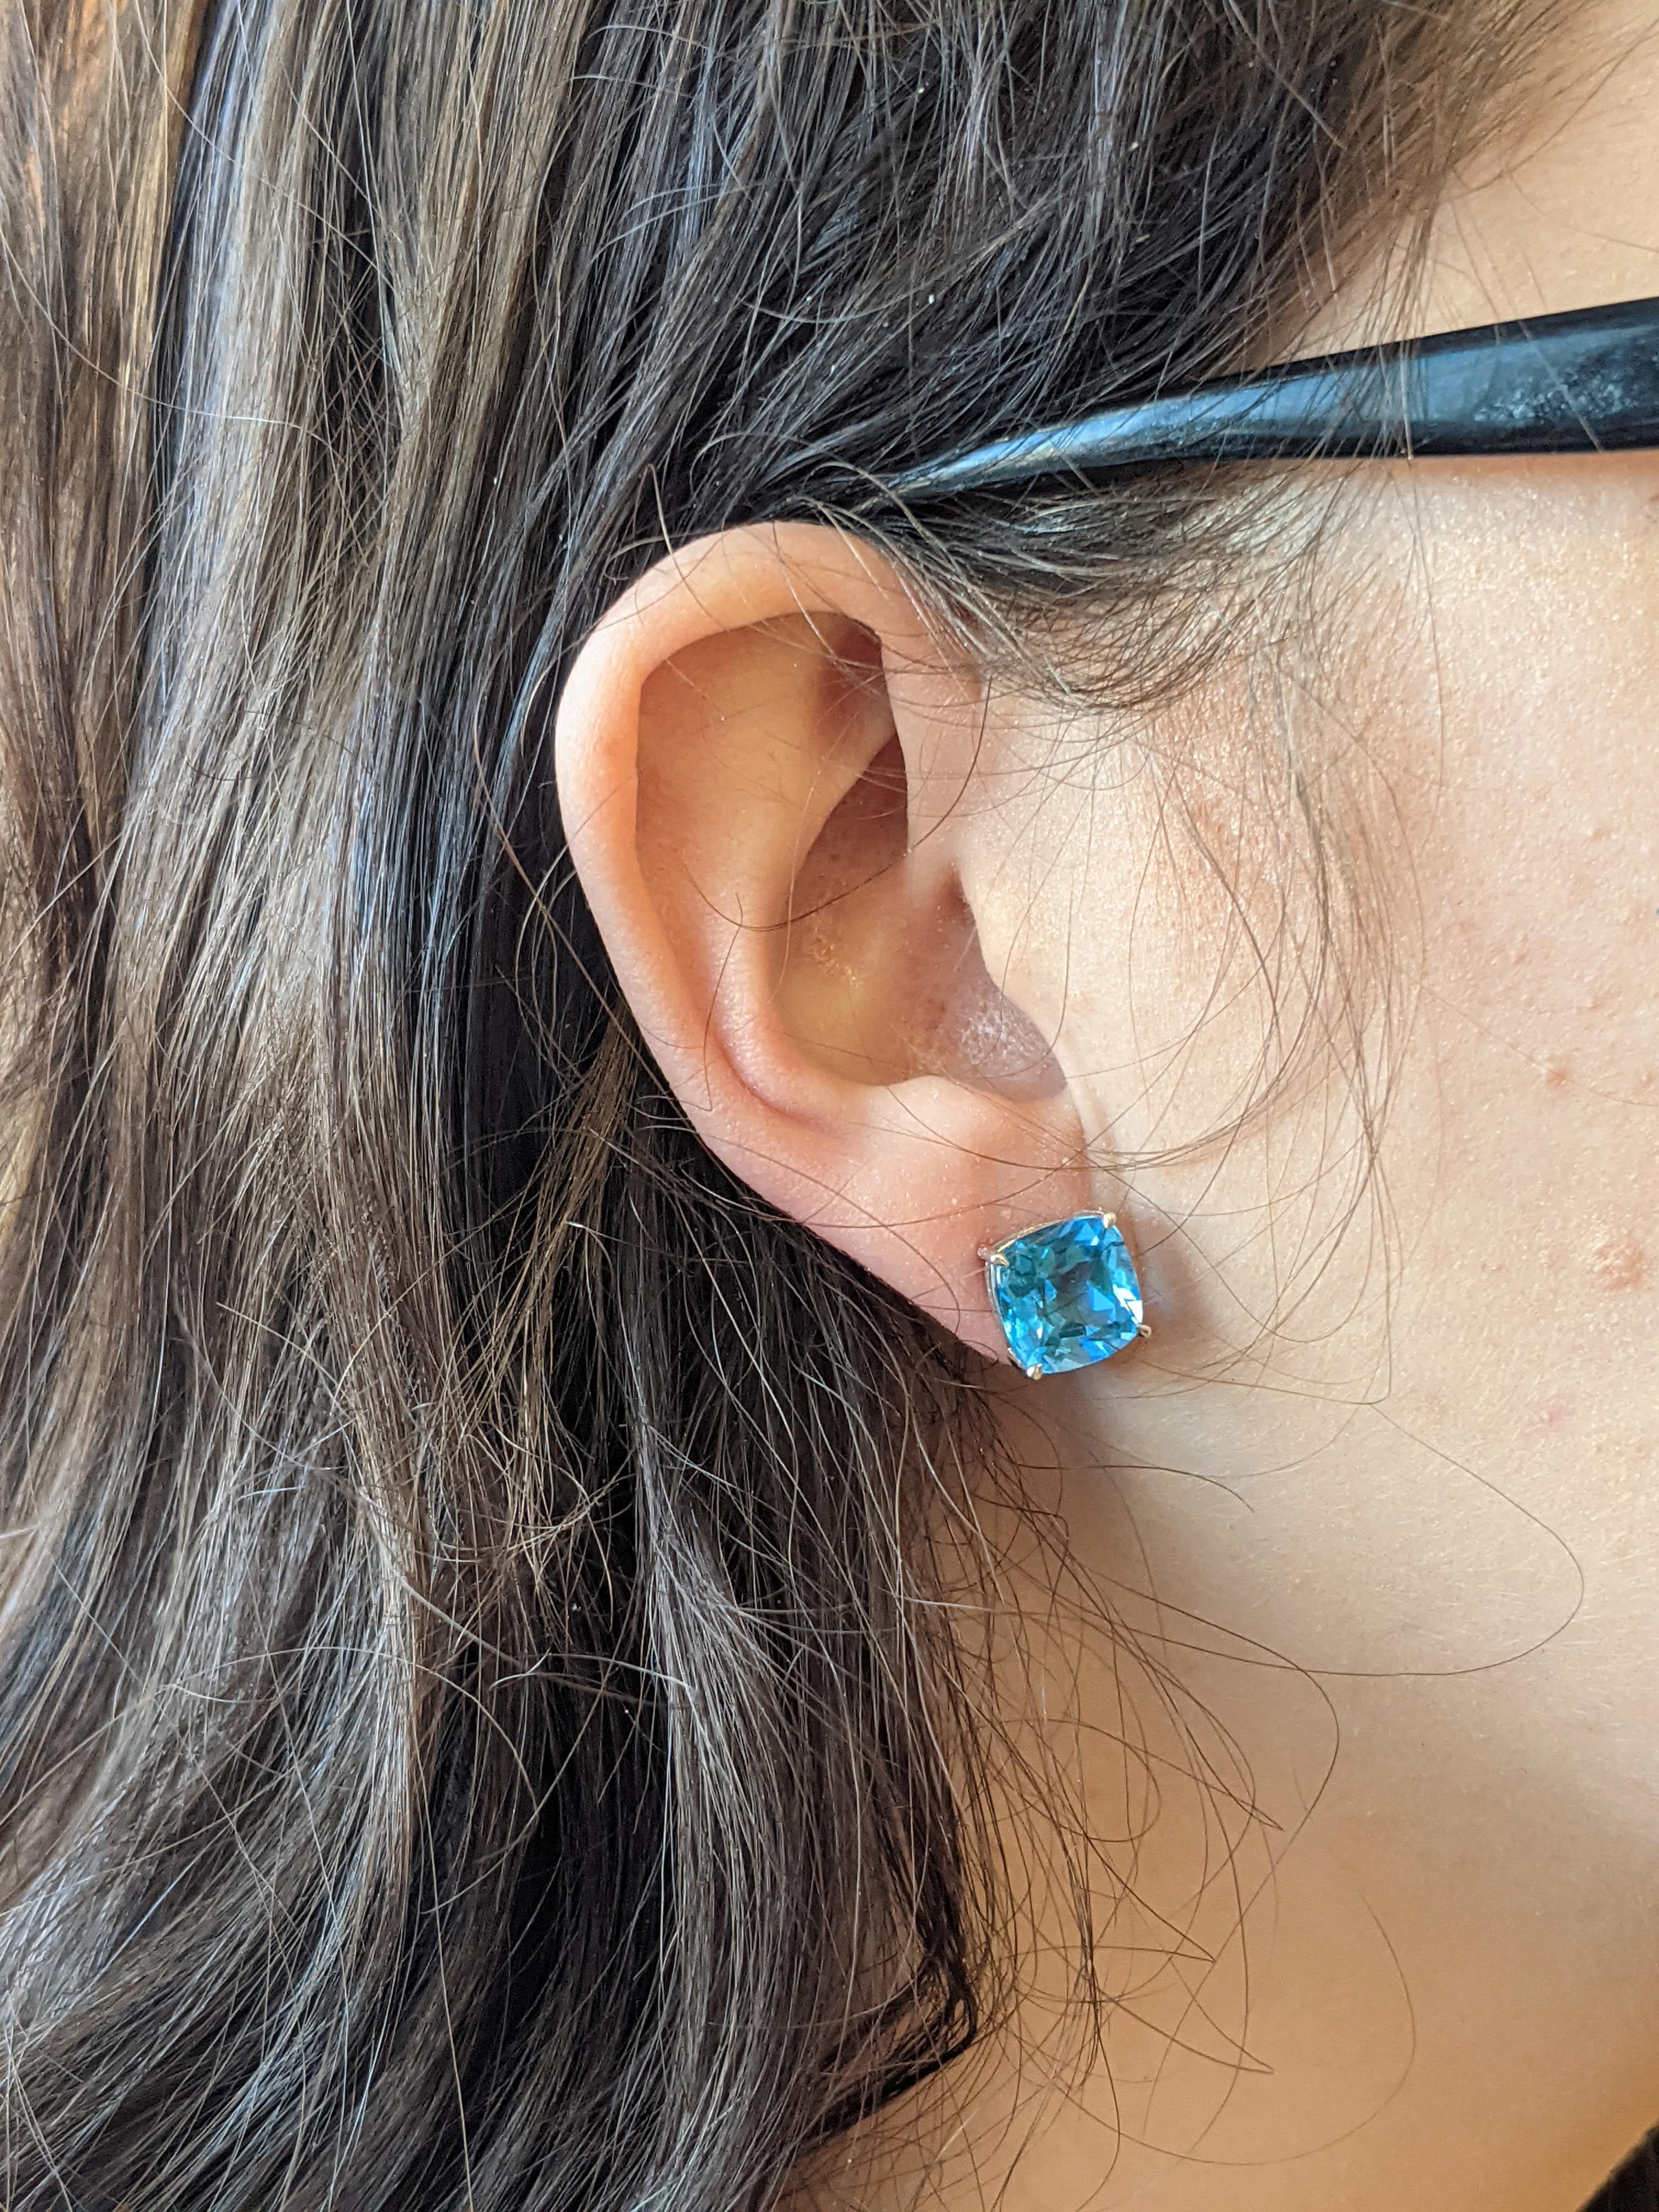 In a beautiful clash of flashing 14k white gold and brilliant blue topaz, these cushion-cut stud earrings check every box! The elegant shape and finery of the gemstones mean they are the ideal accessory for a night out, but their versatile